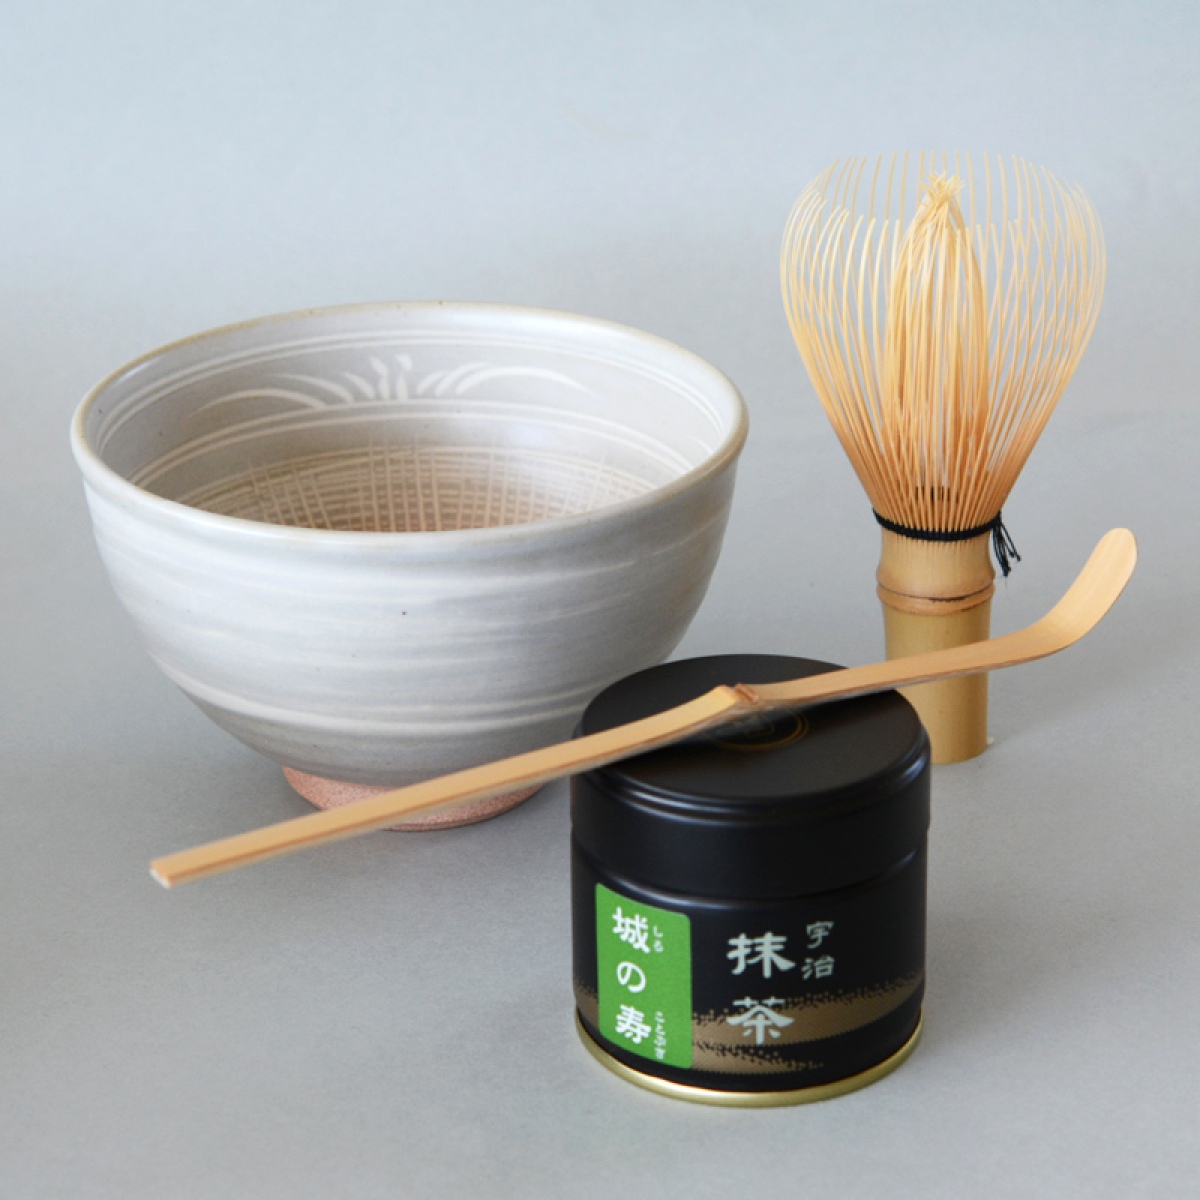 ALL COLOR OPTIONS Matcha Tea Set, Bowl With Spout, Bamboo Whisk, Whisk  Holder Stand, Gift Set, Coffee, Japanese Chawan Set, Handmade 